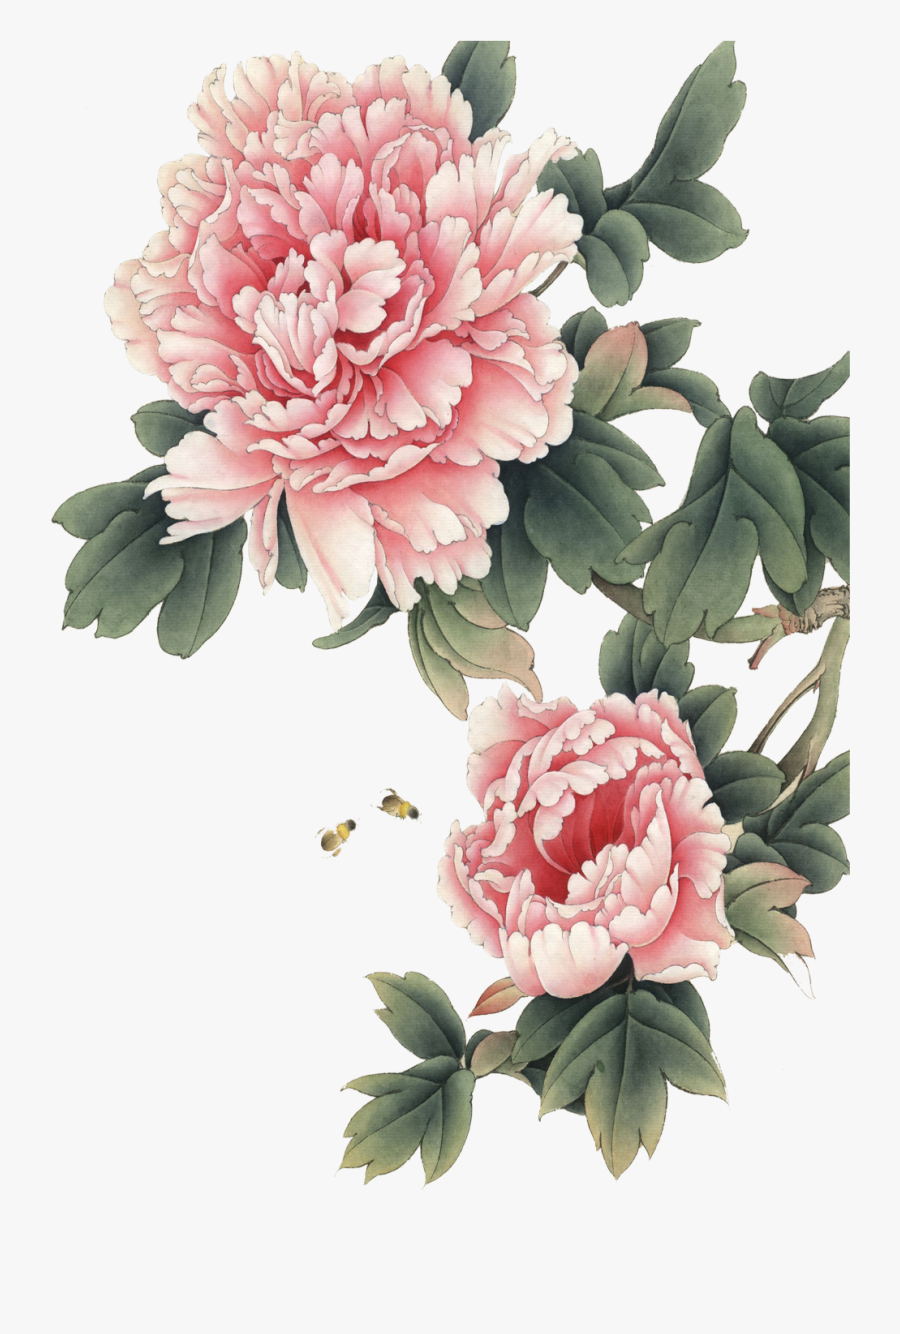 Gongbi Art Transprent Png Free Download Plant - Chinese Peony Painting, Transparent Clipart